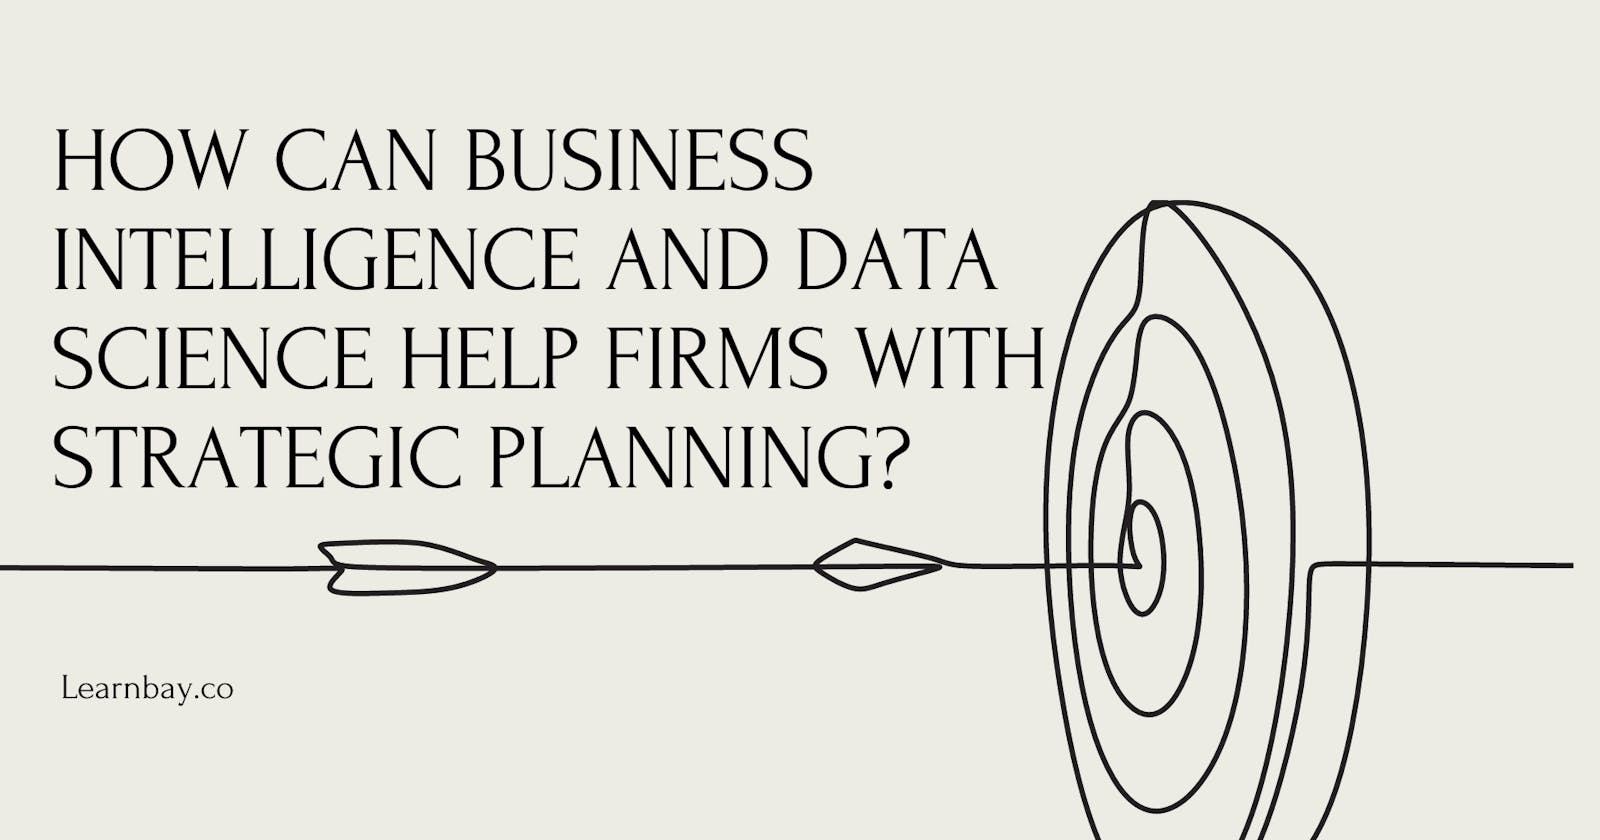 How Can Business Intelligence And Data Science Help Firms With Strategic Planning?